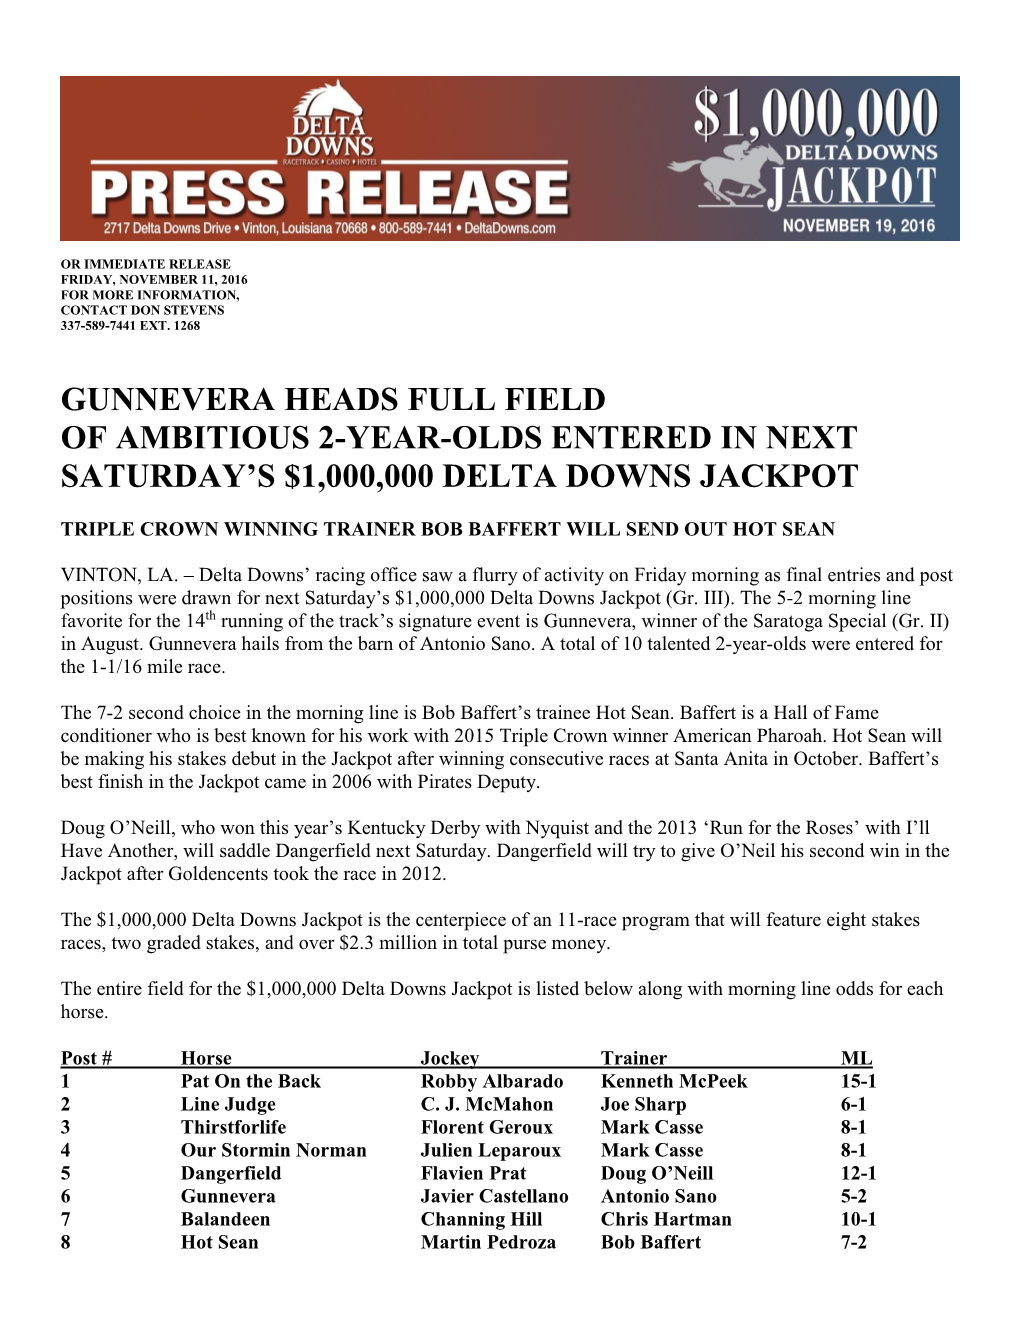 Gunnevera Heads Full Field of Ambitious 2-Year-Olds Entered in Next Saturday's $1,000,000 Delta Downs Jackpot